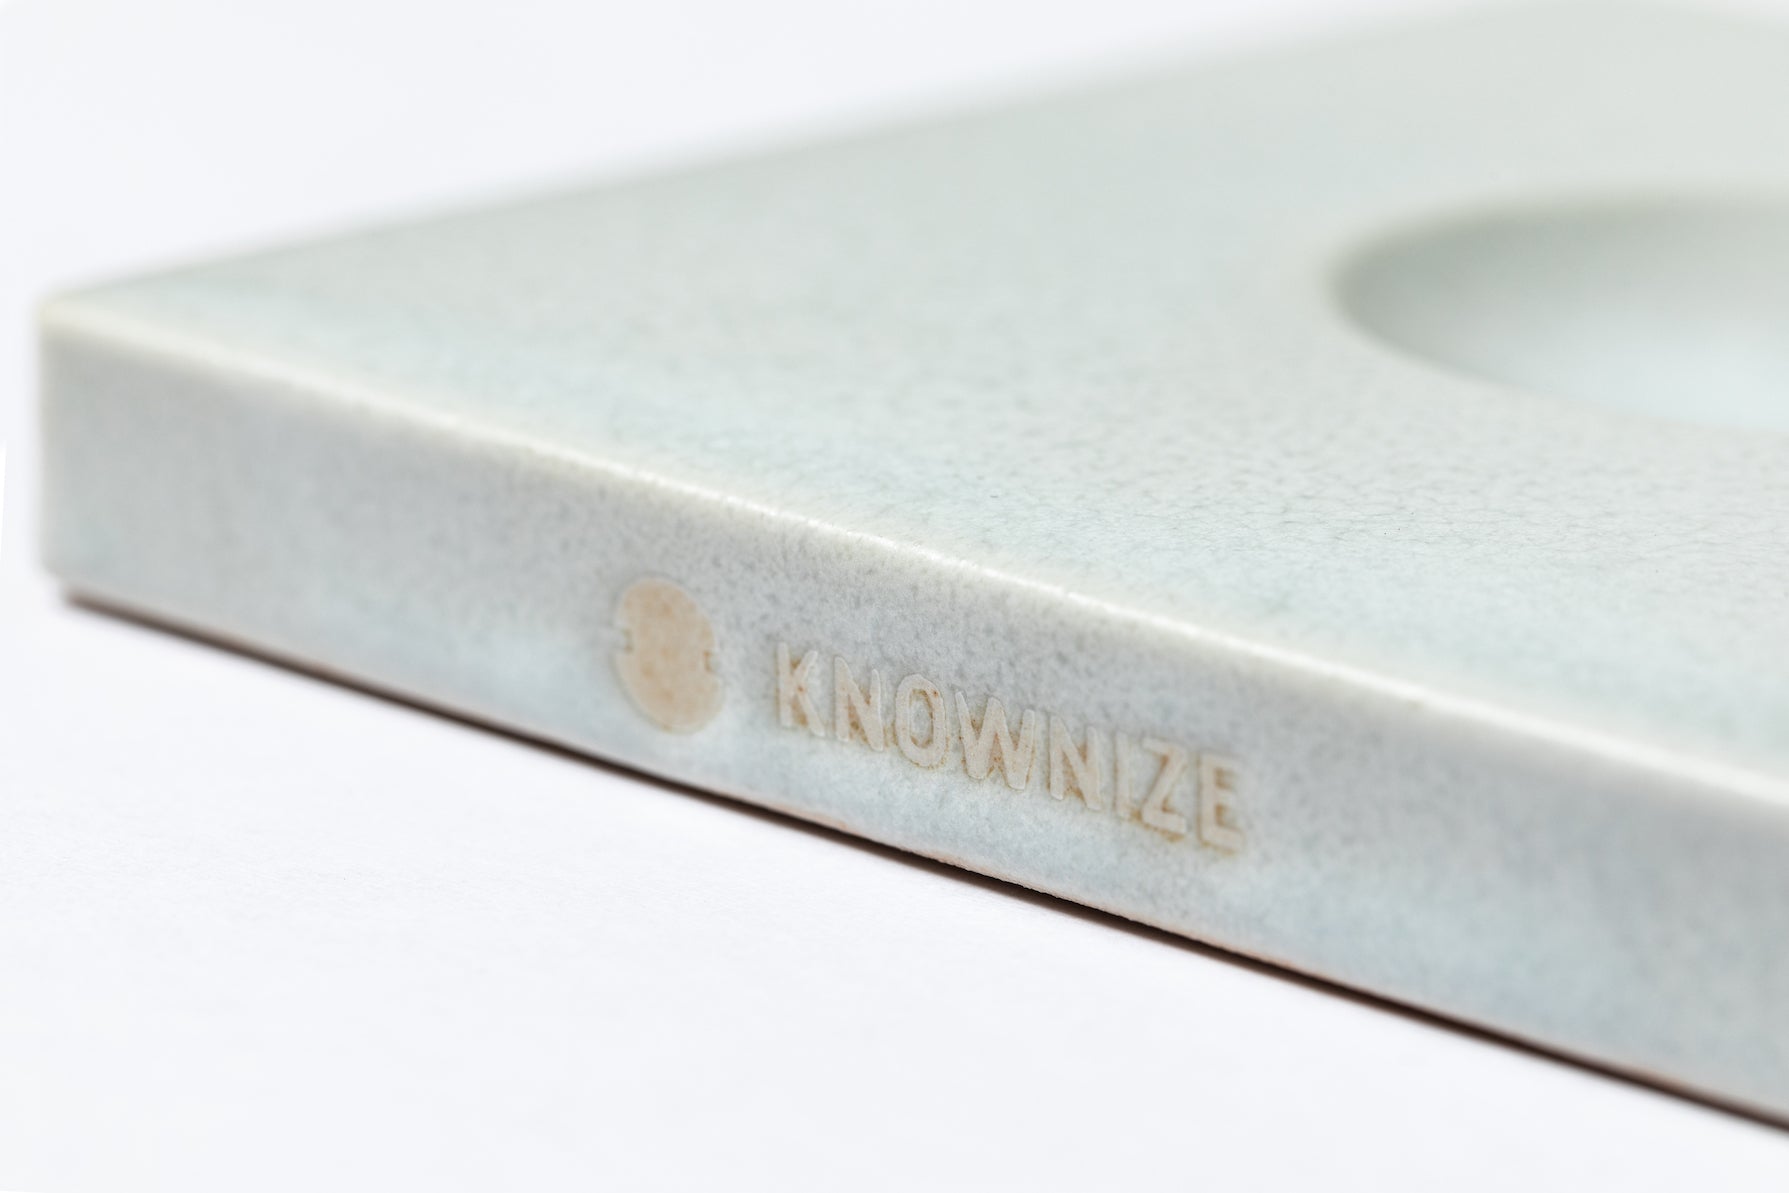 Global Green × Plant Plate - KNOWNIZE